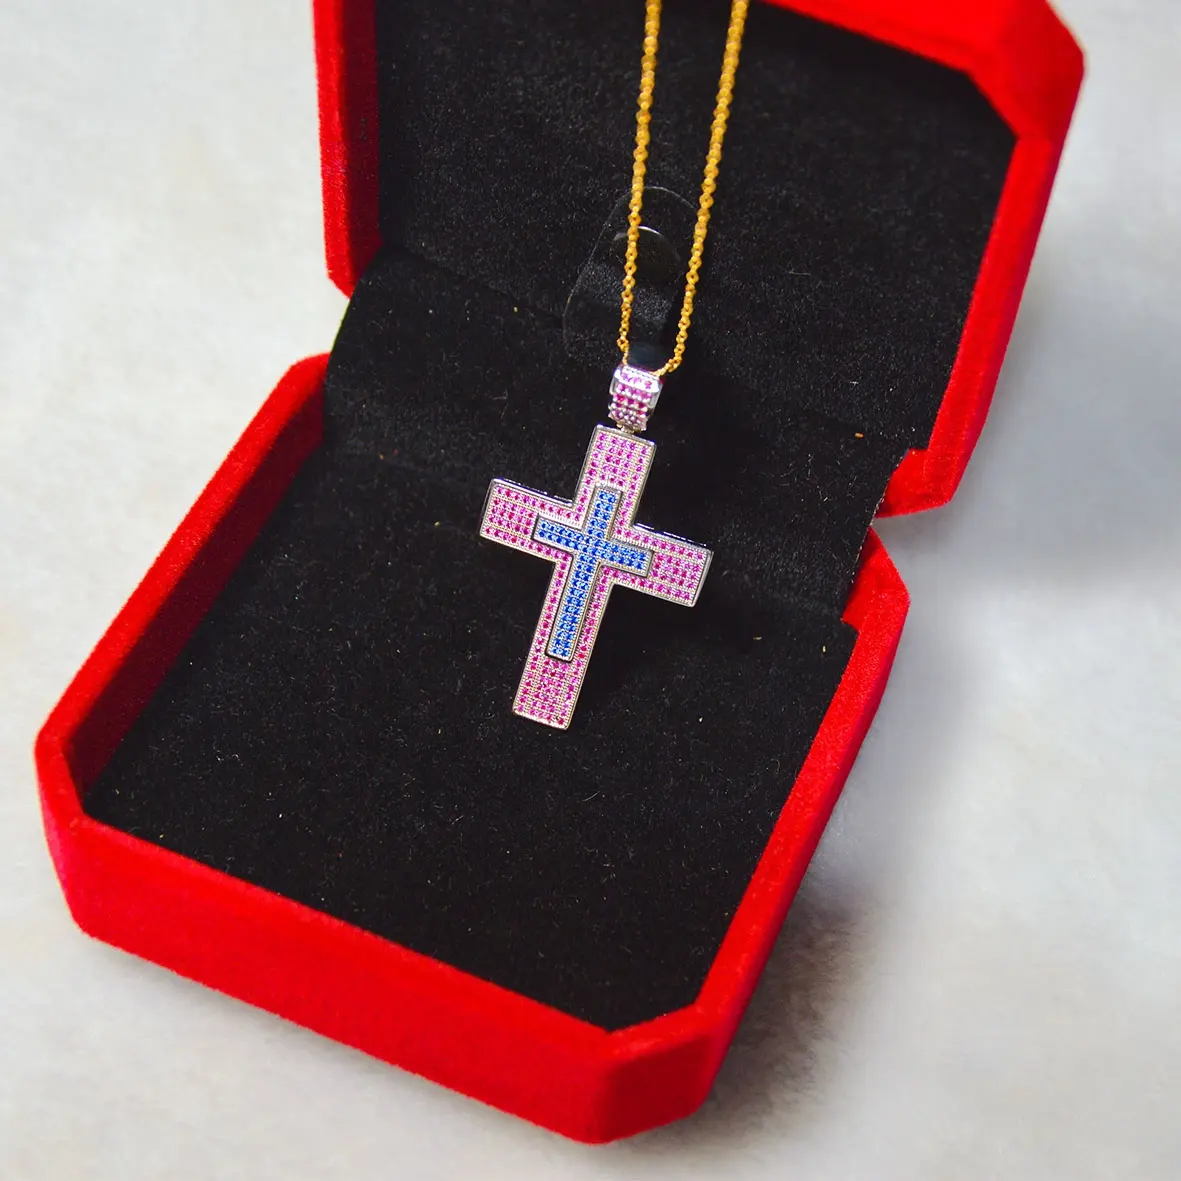 Wholesale 18k Gold/Silver Plated Simple Turquoise Cross Pendant Choker Necklace Simple Tiny Necklace For Women Girls